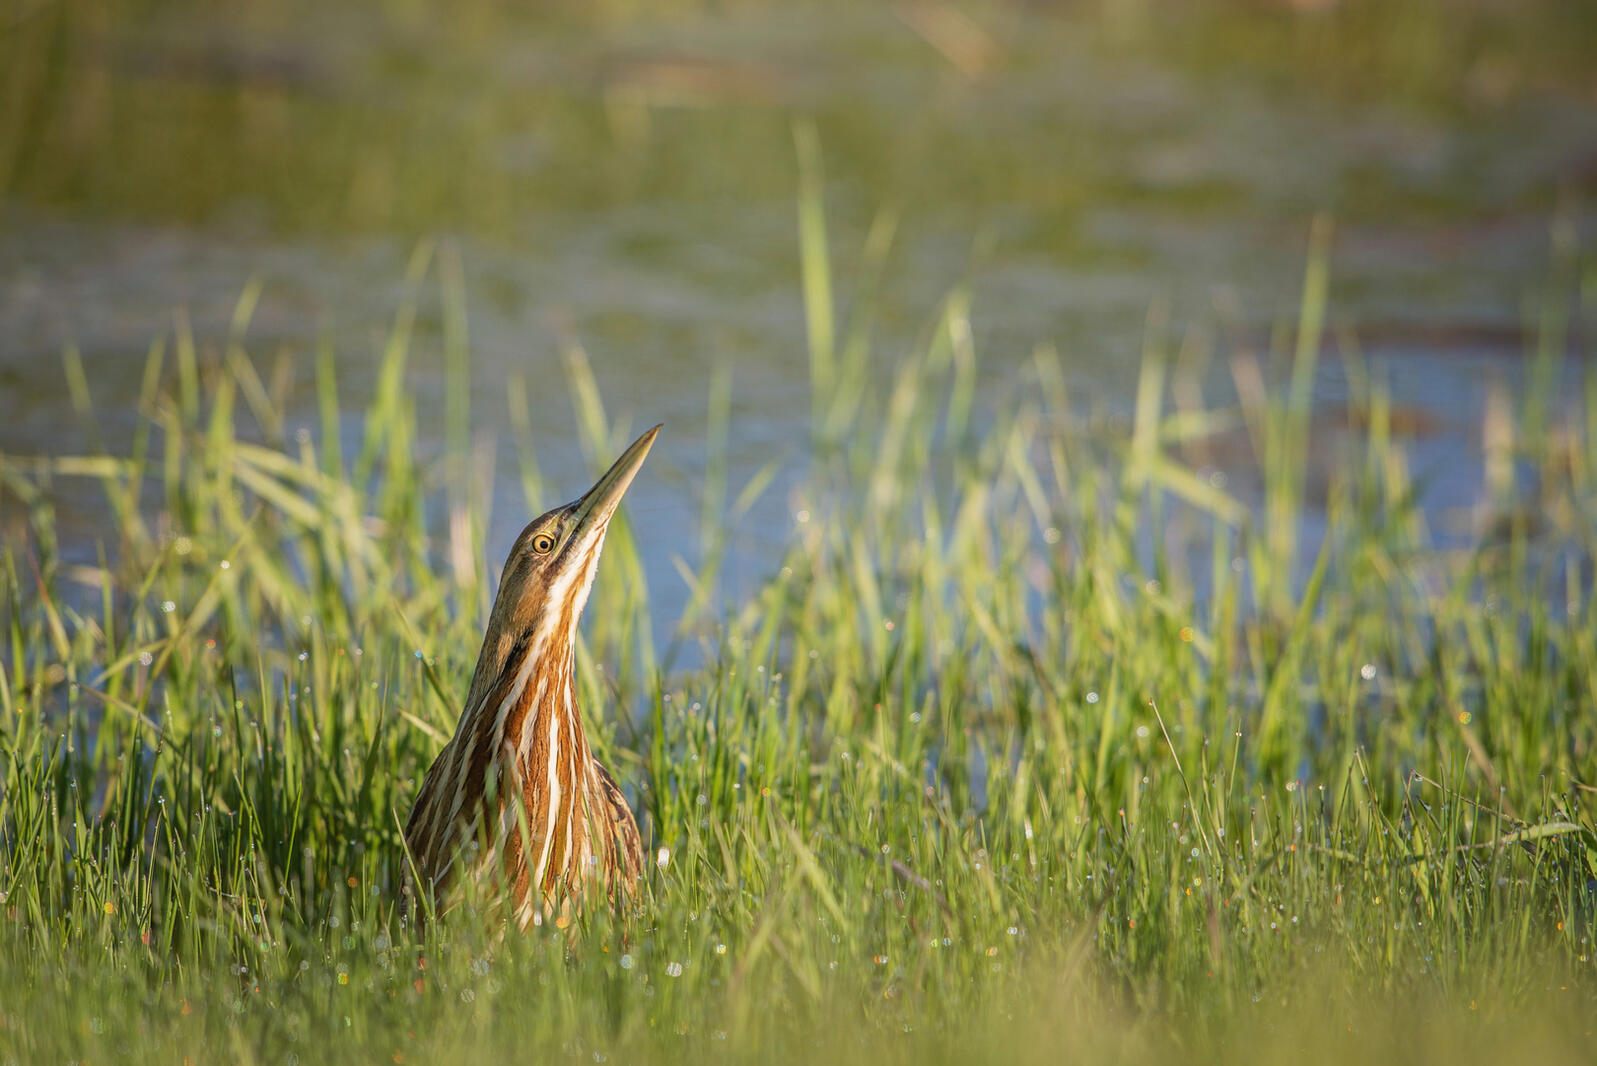 An American Bittern looks up from grassy marshland.